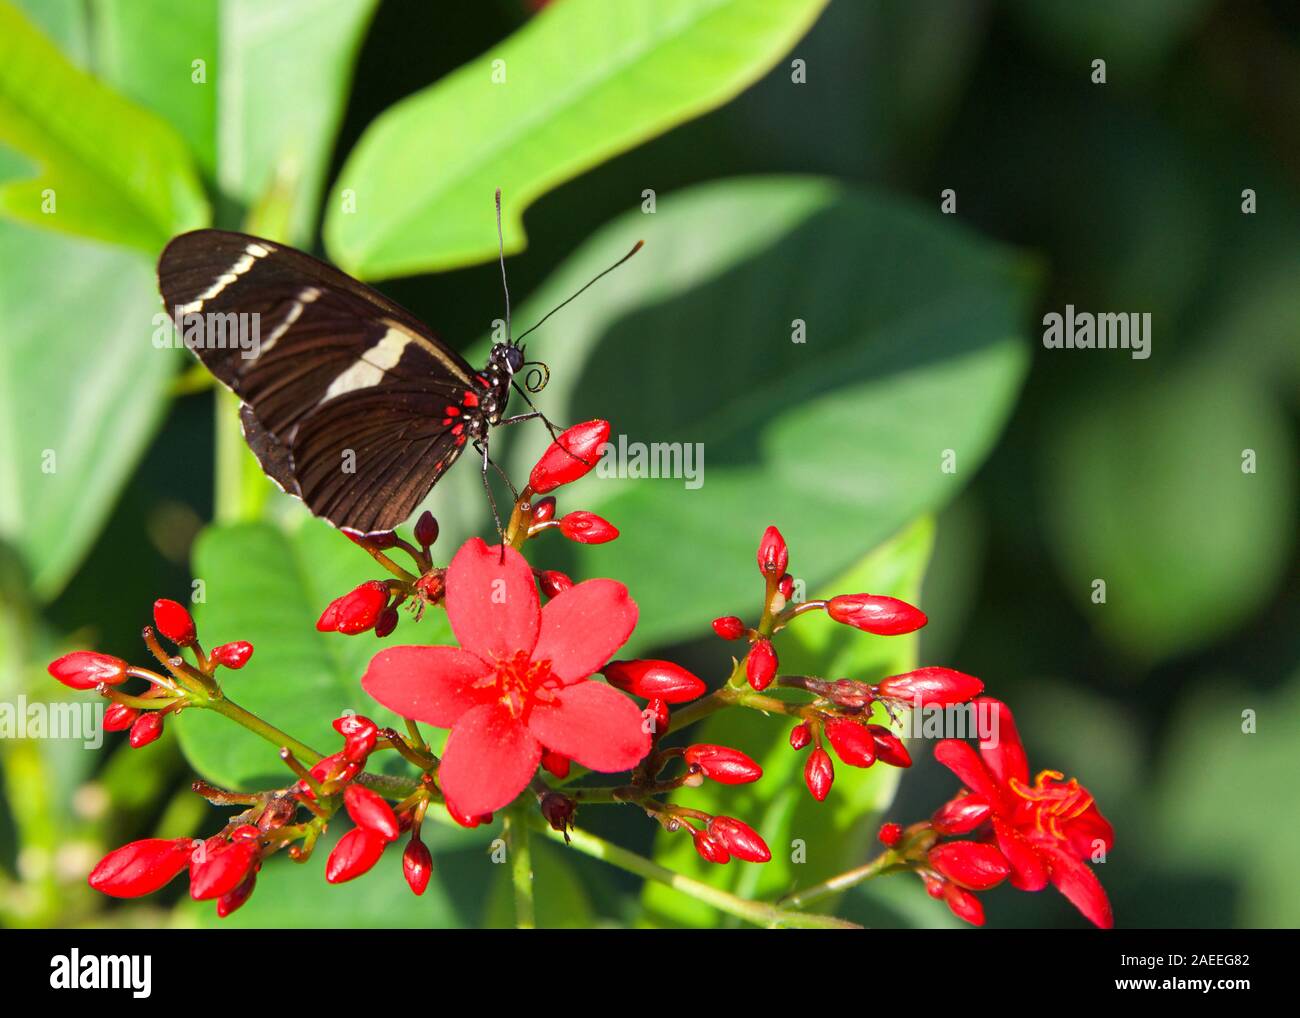 The Sara longwing is a colorful species of neotropical heliconiid butterfly found from Mexico to the Amazon Basin and southern Brazil. Profile view pe Stock Photo